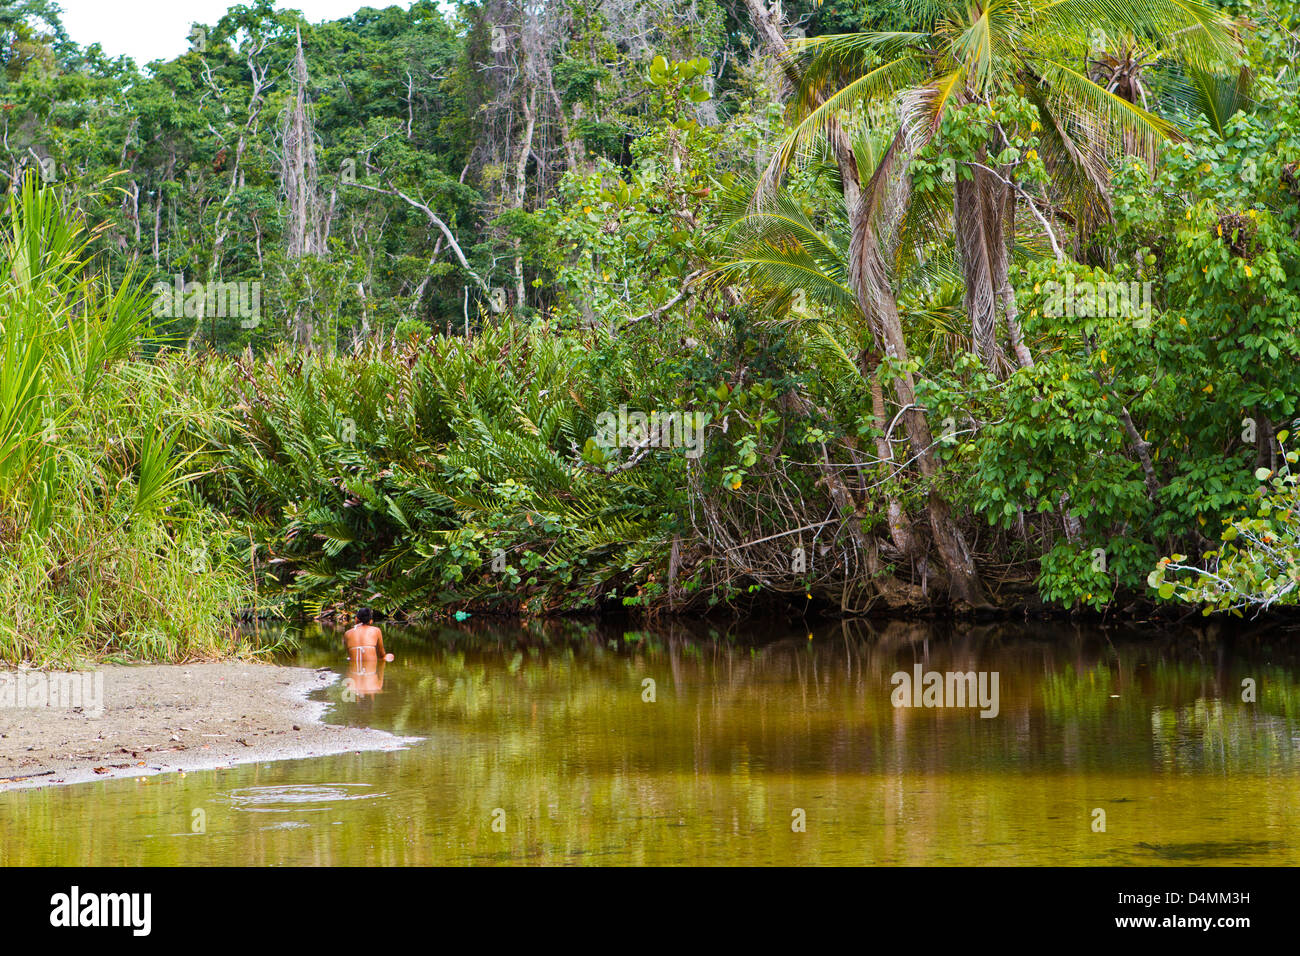 Young girl resting in river with lush vegetation Stock Photo